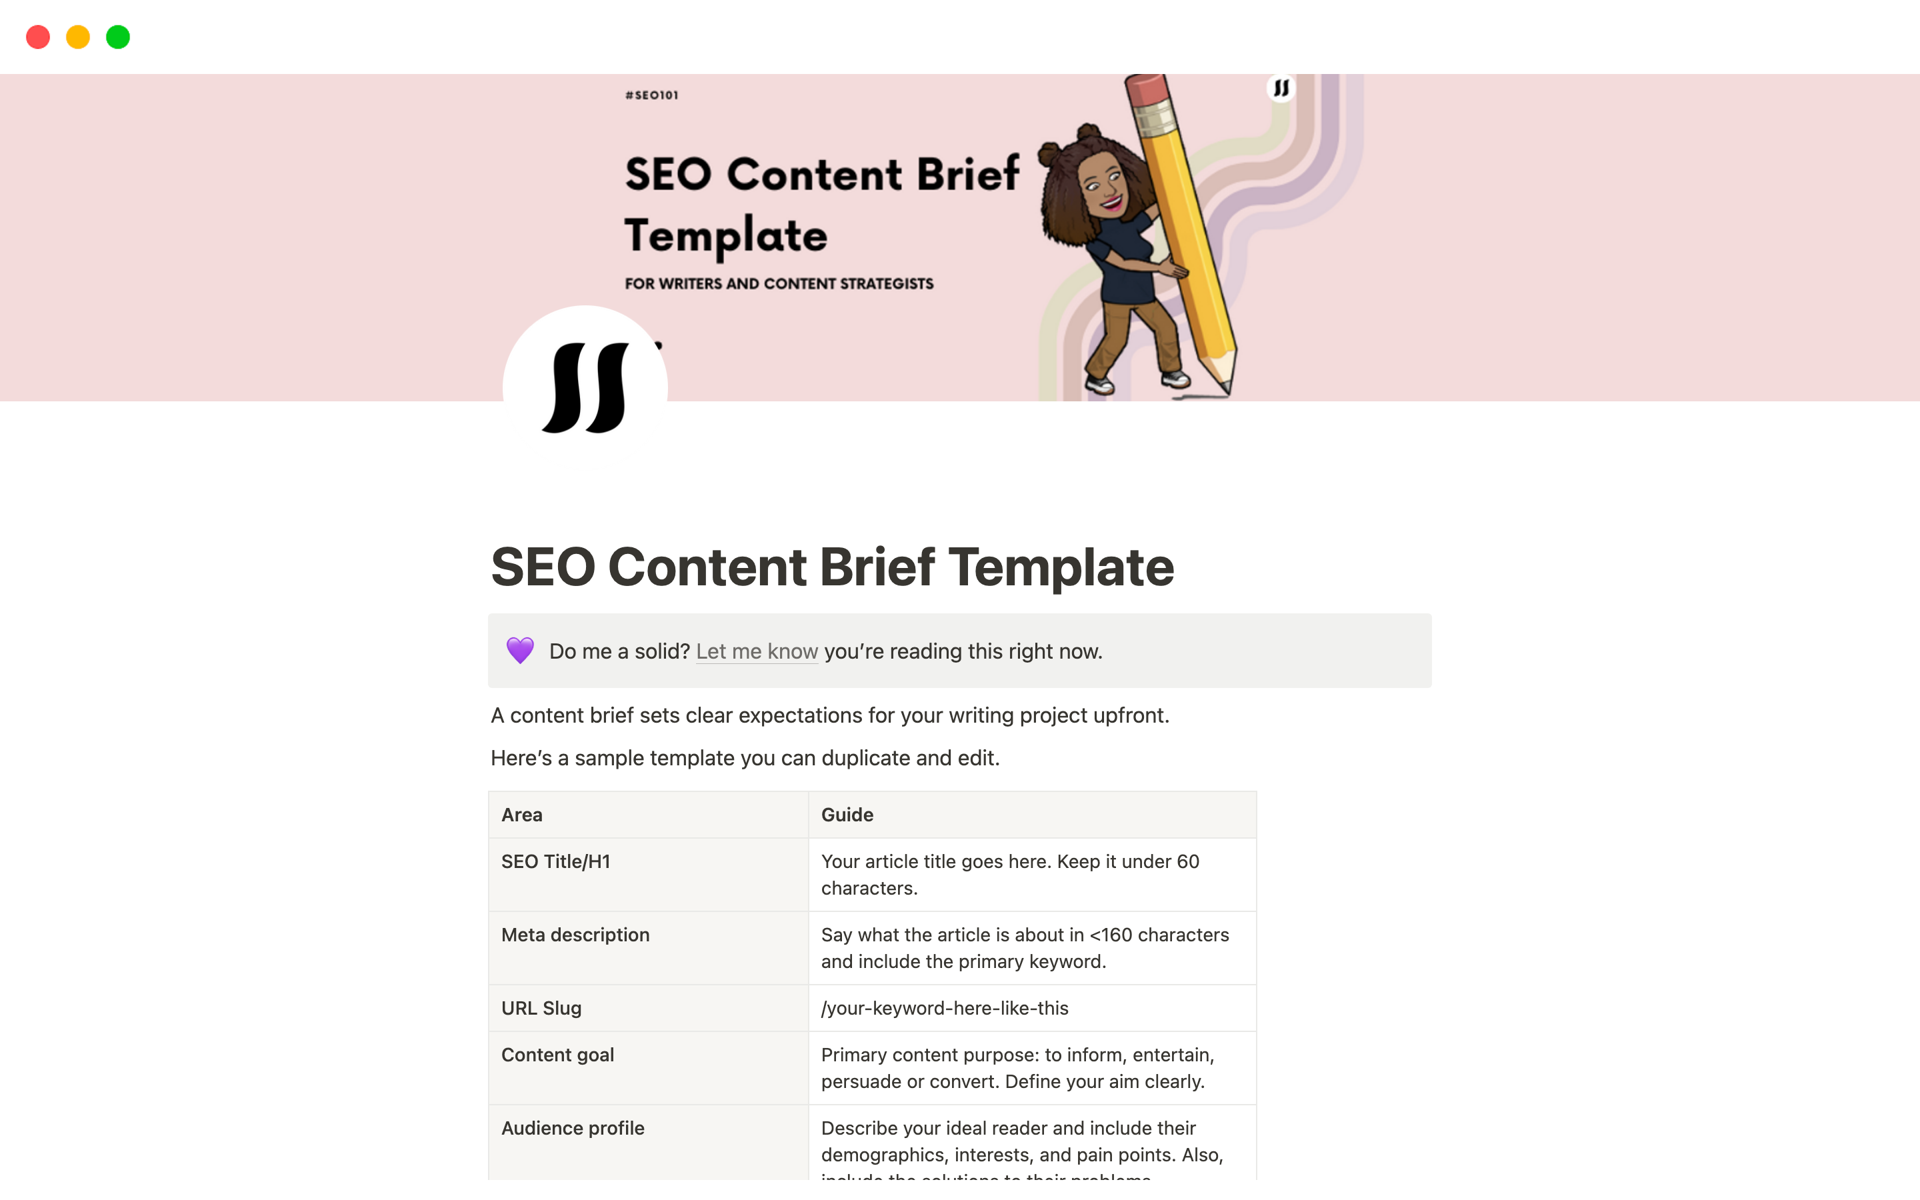 NotionによるBest Content Brief Templates for Marketing Analystsコレクションのスクリーンショット